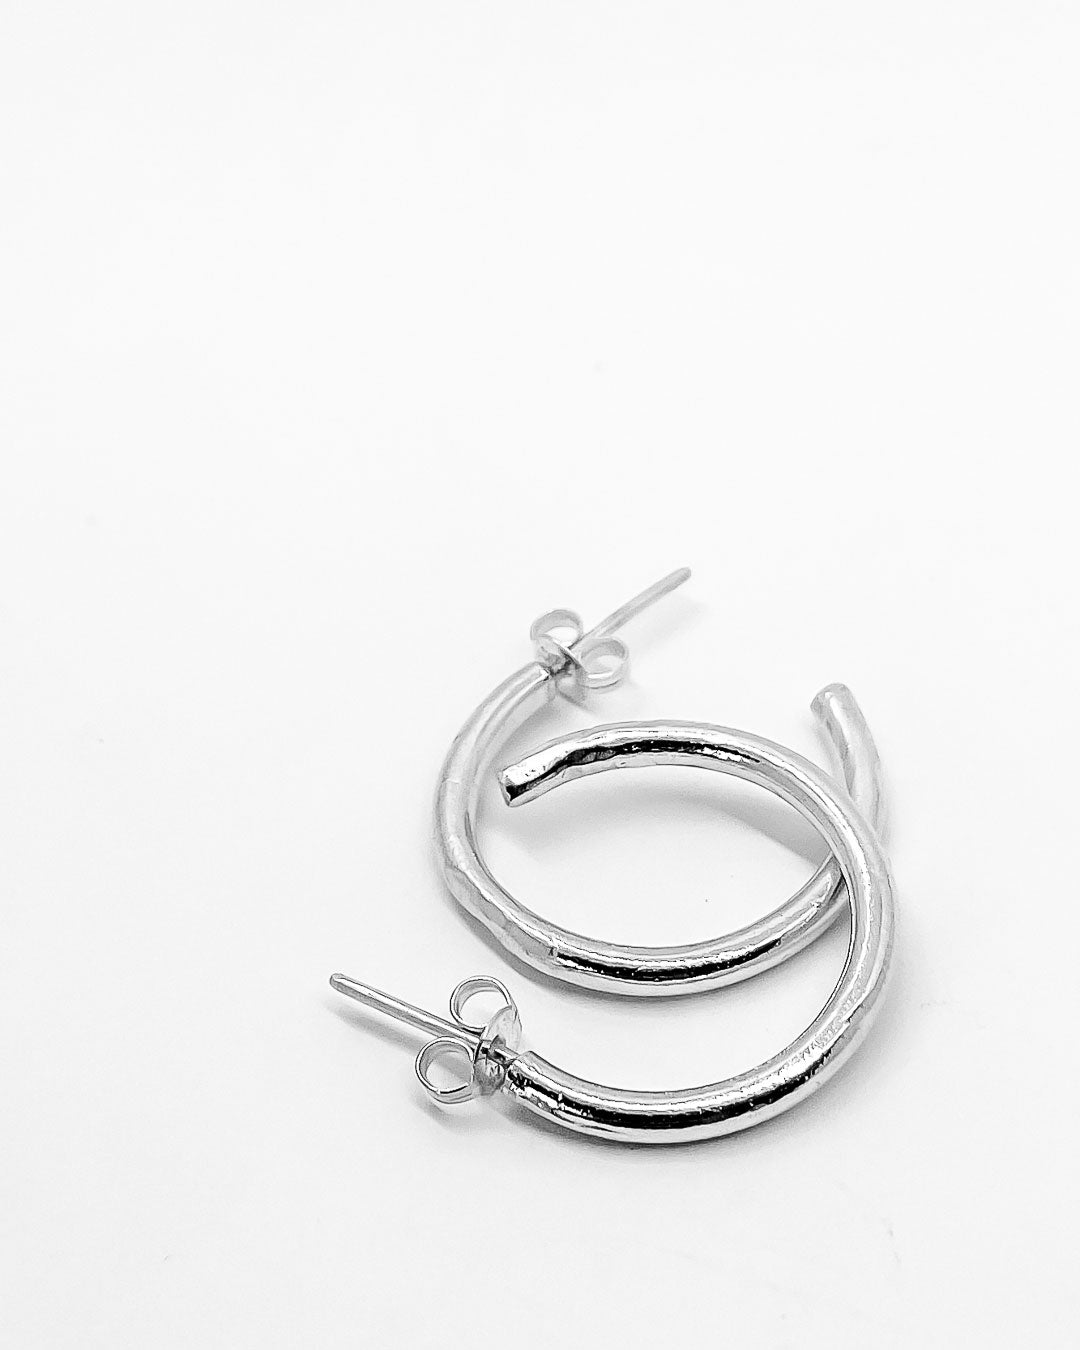 A pair of Sterling Silver Hoop earrings overlapping on a white surface